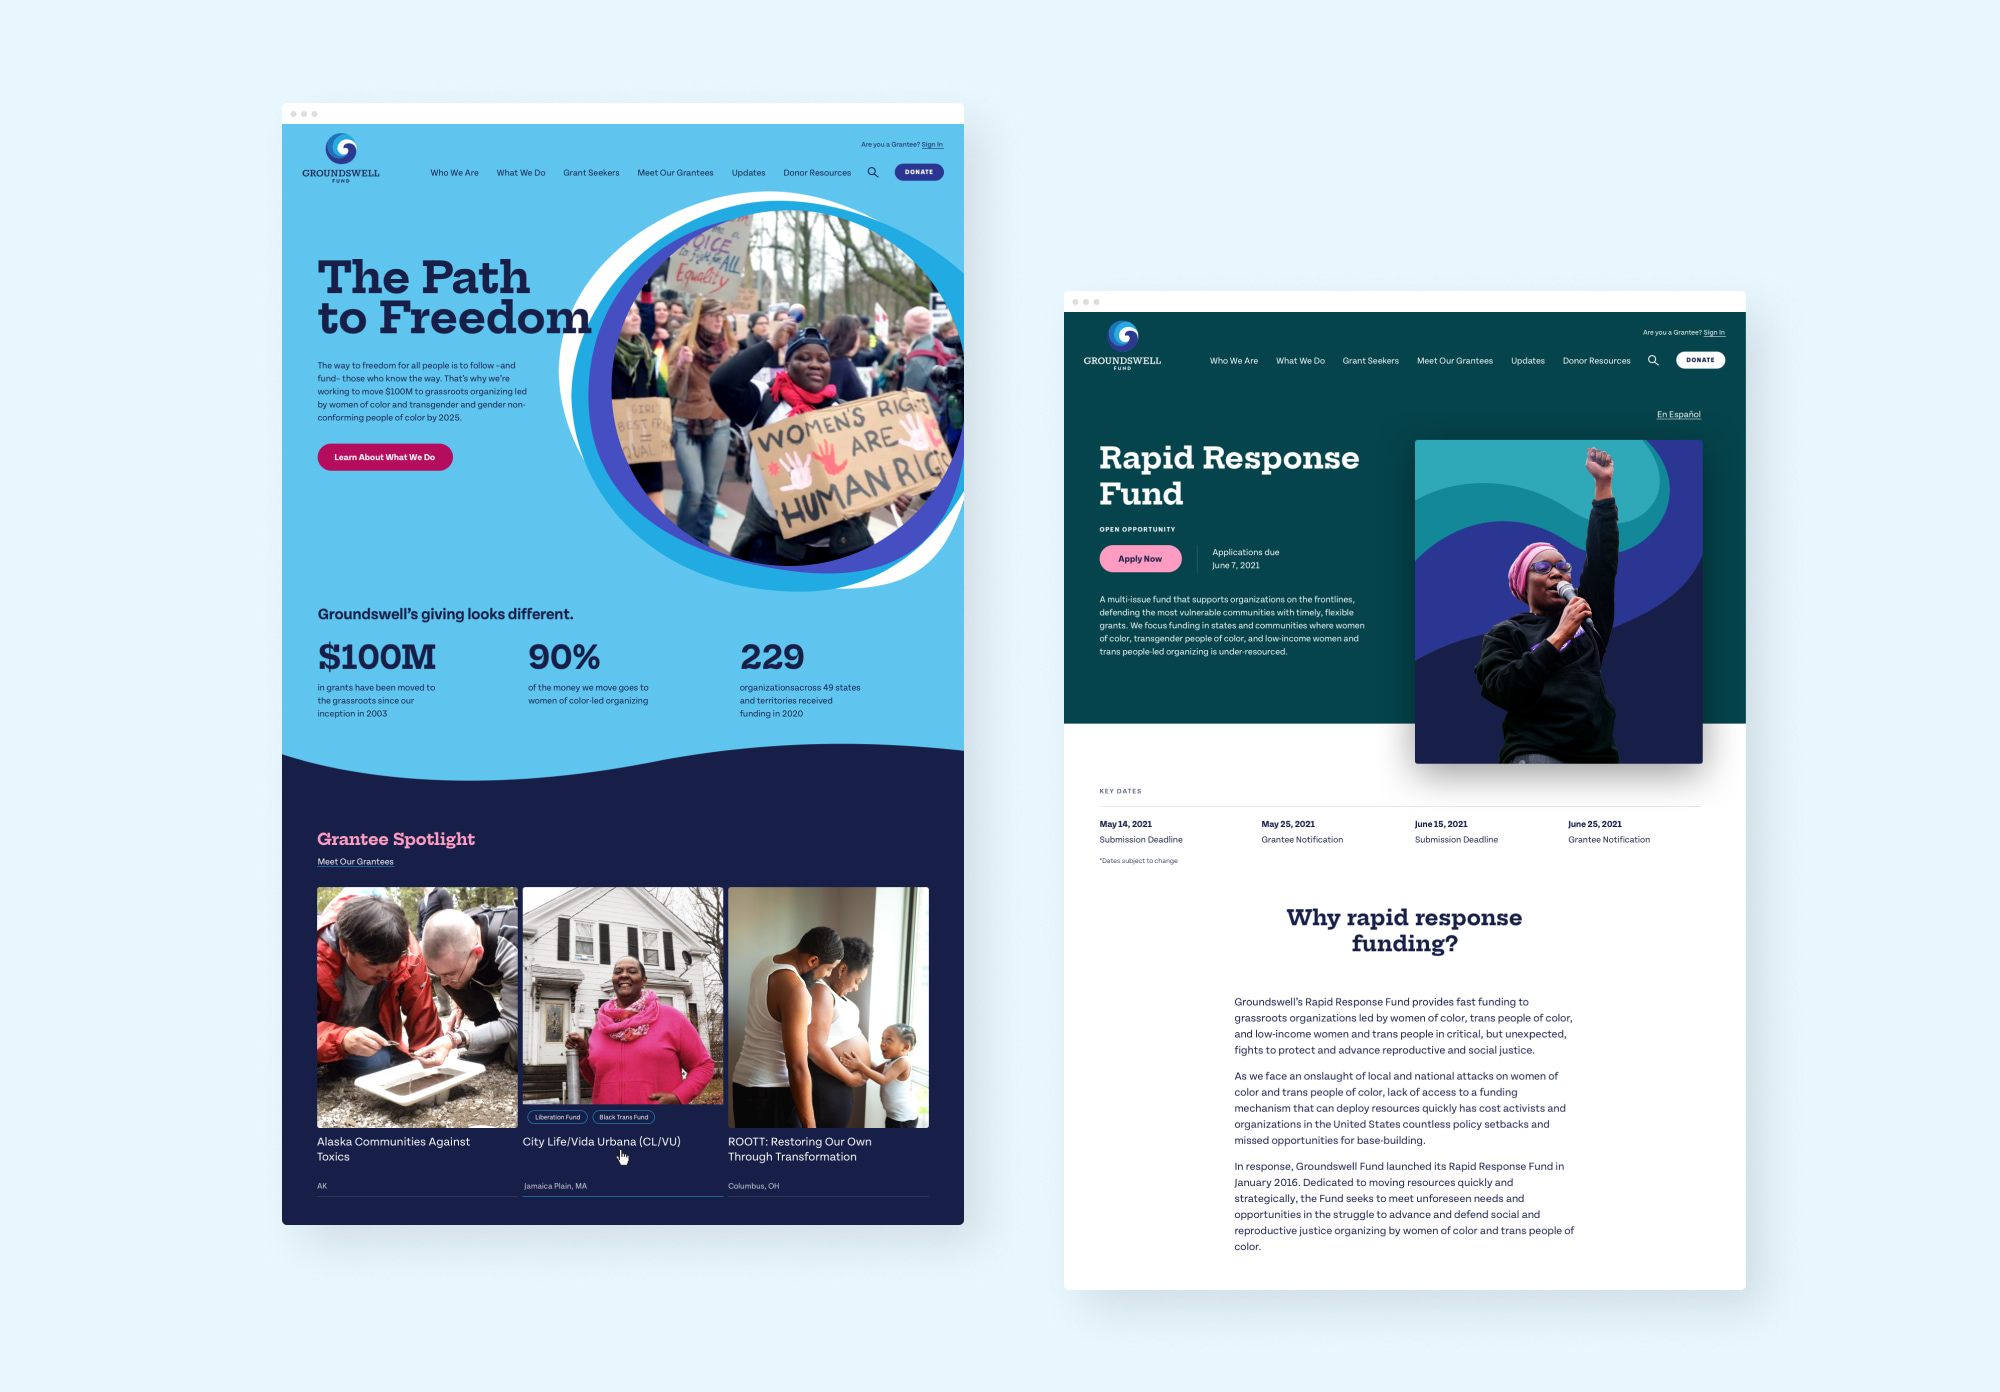 A collage of the webpage designs for Groundswell. The designs include swaths of light blue, dark navy, and teal backgrounds with playful typography and protest images of Women of Color activists.